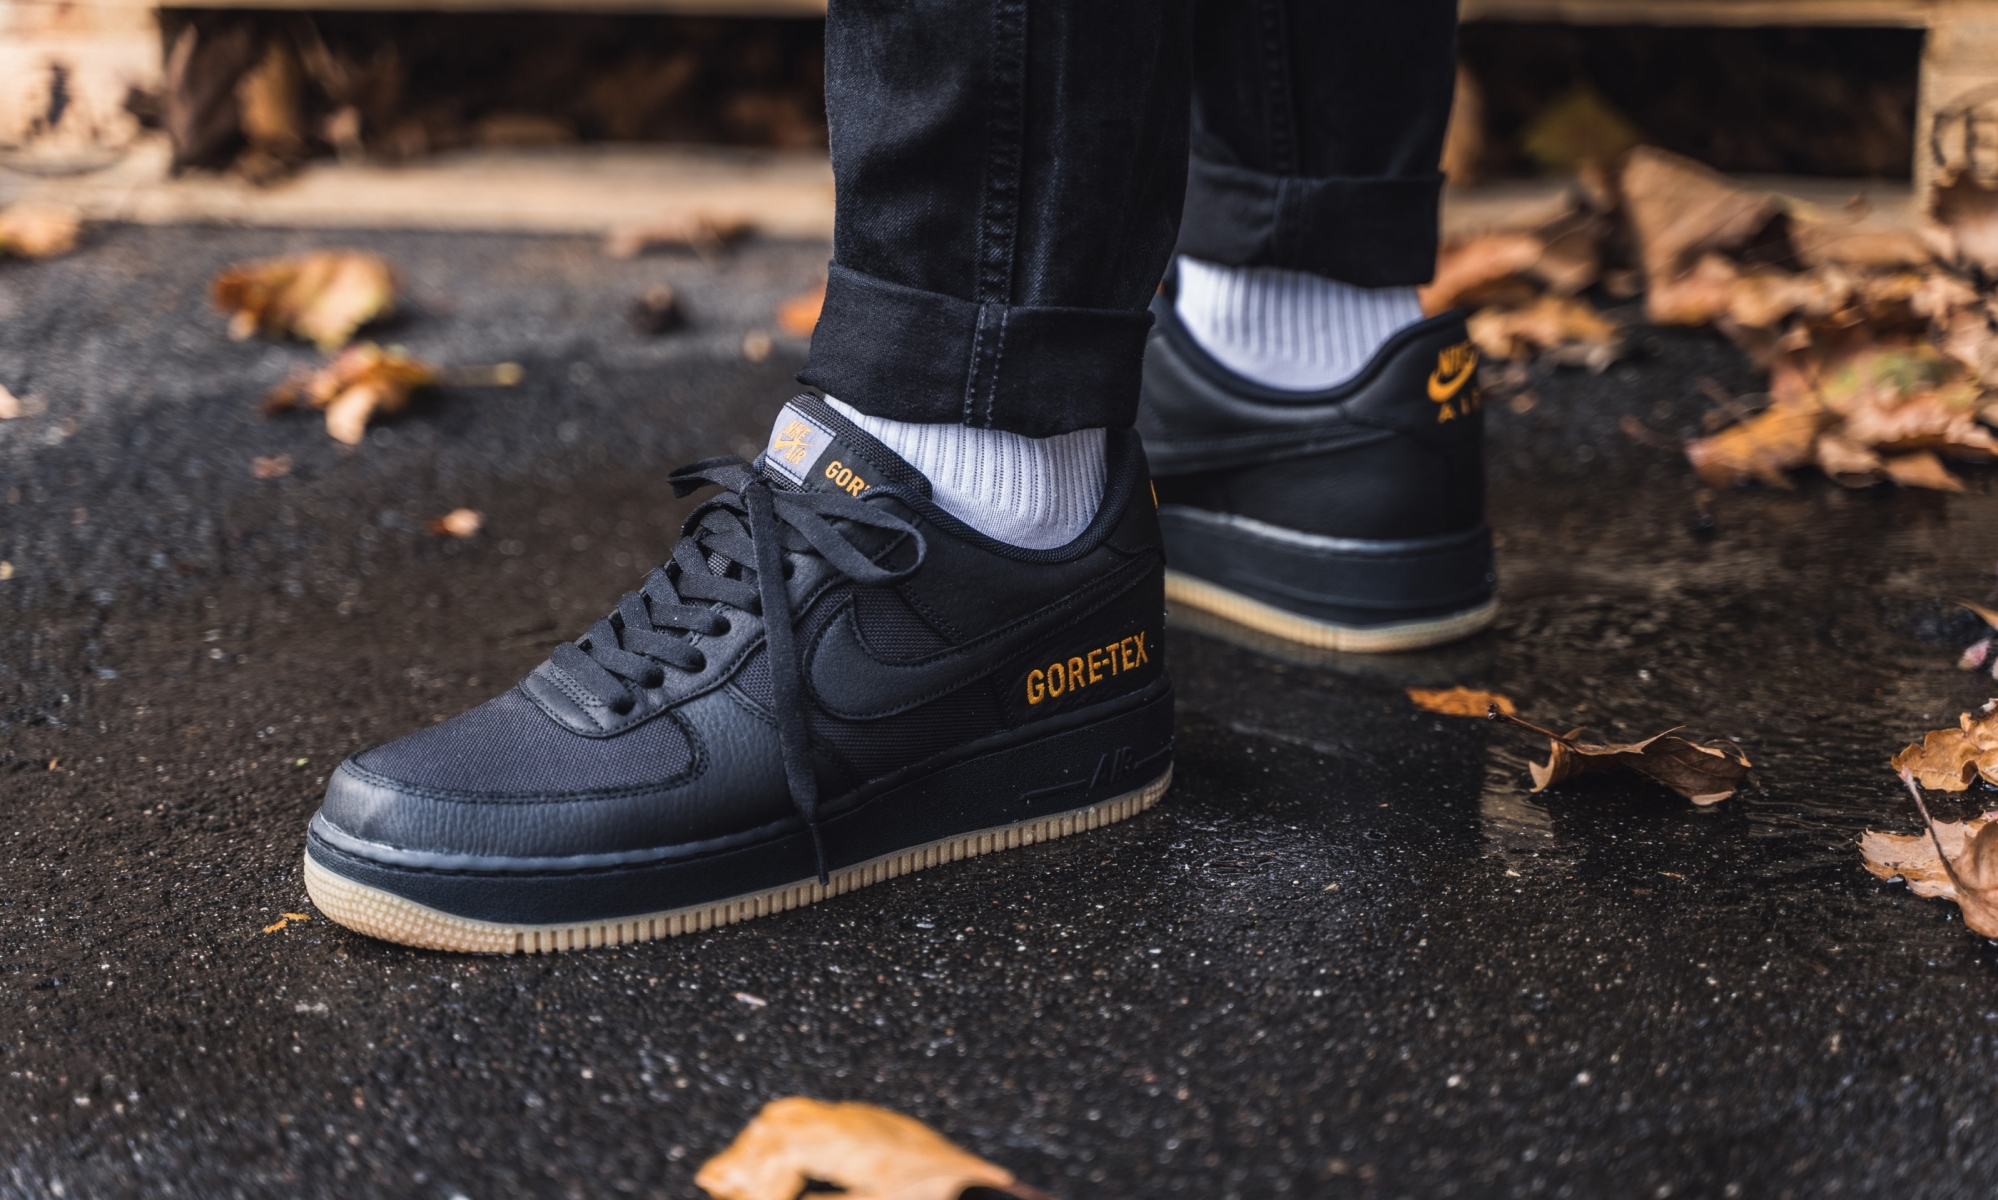 Nike Updates The Air Force 1 With GORE-TEX - MASSES